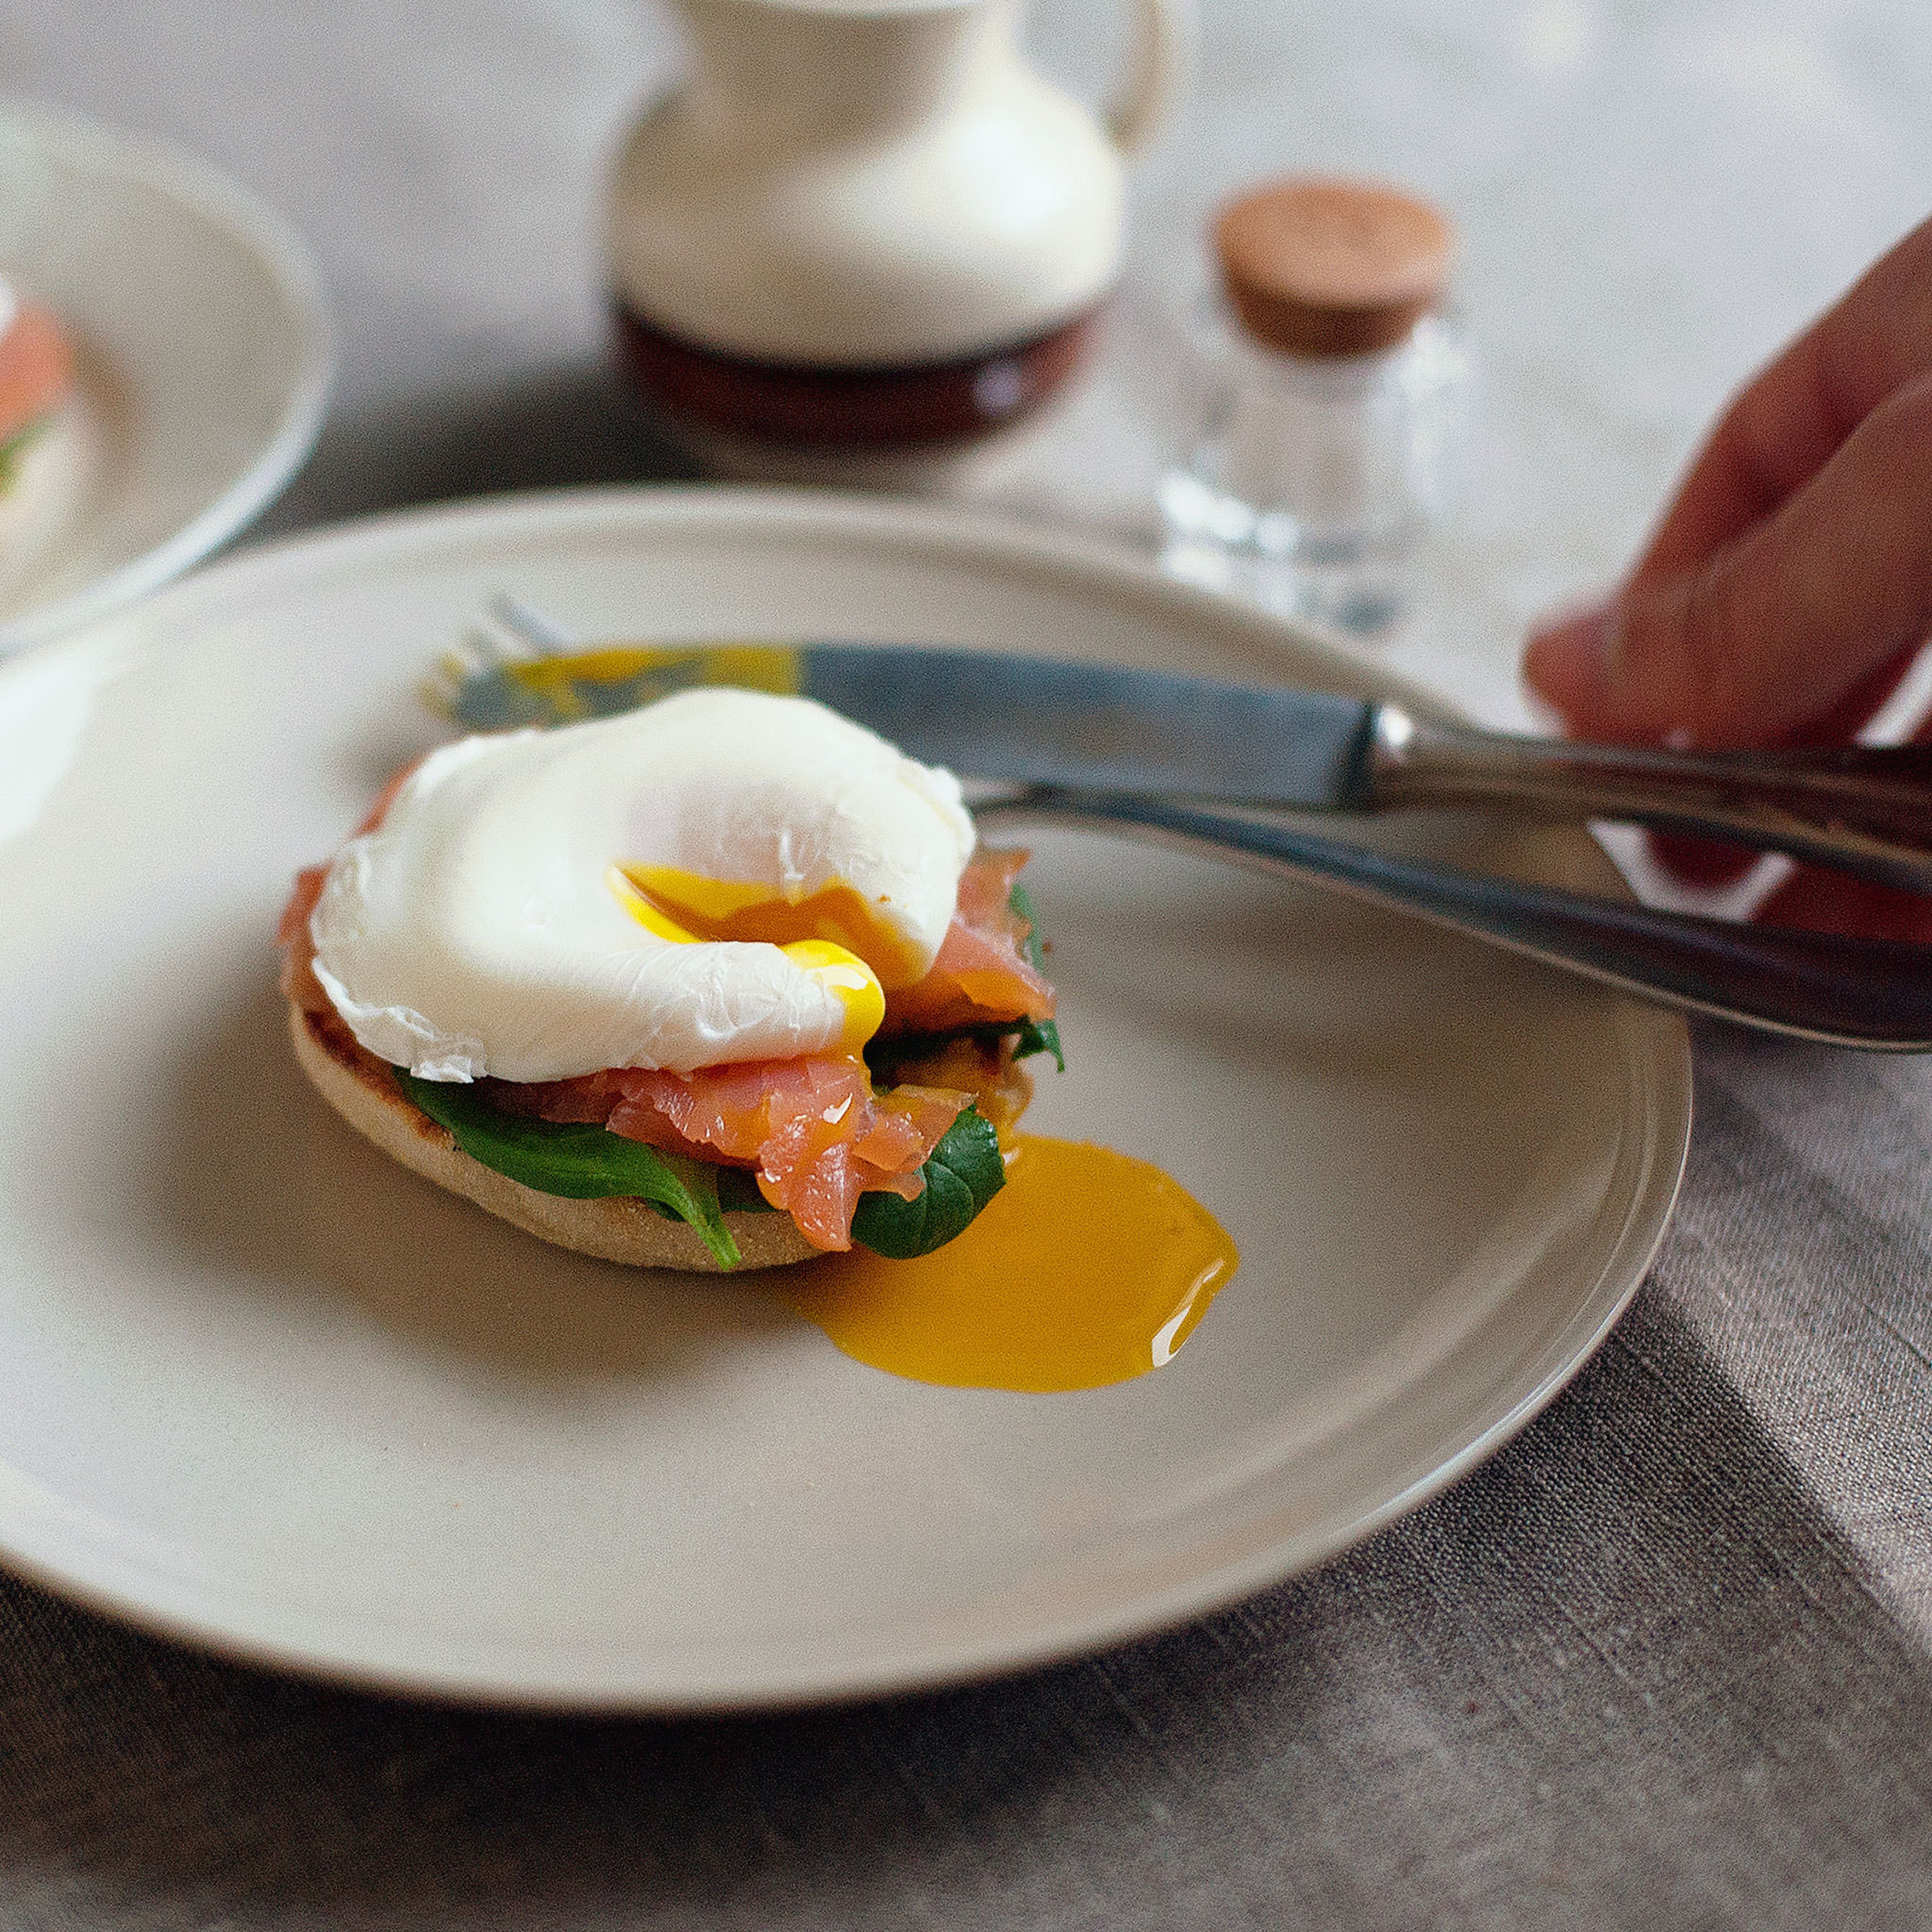 6 Reasons to Stay Home for Brunch